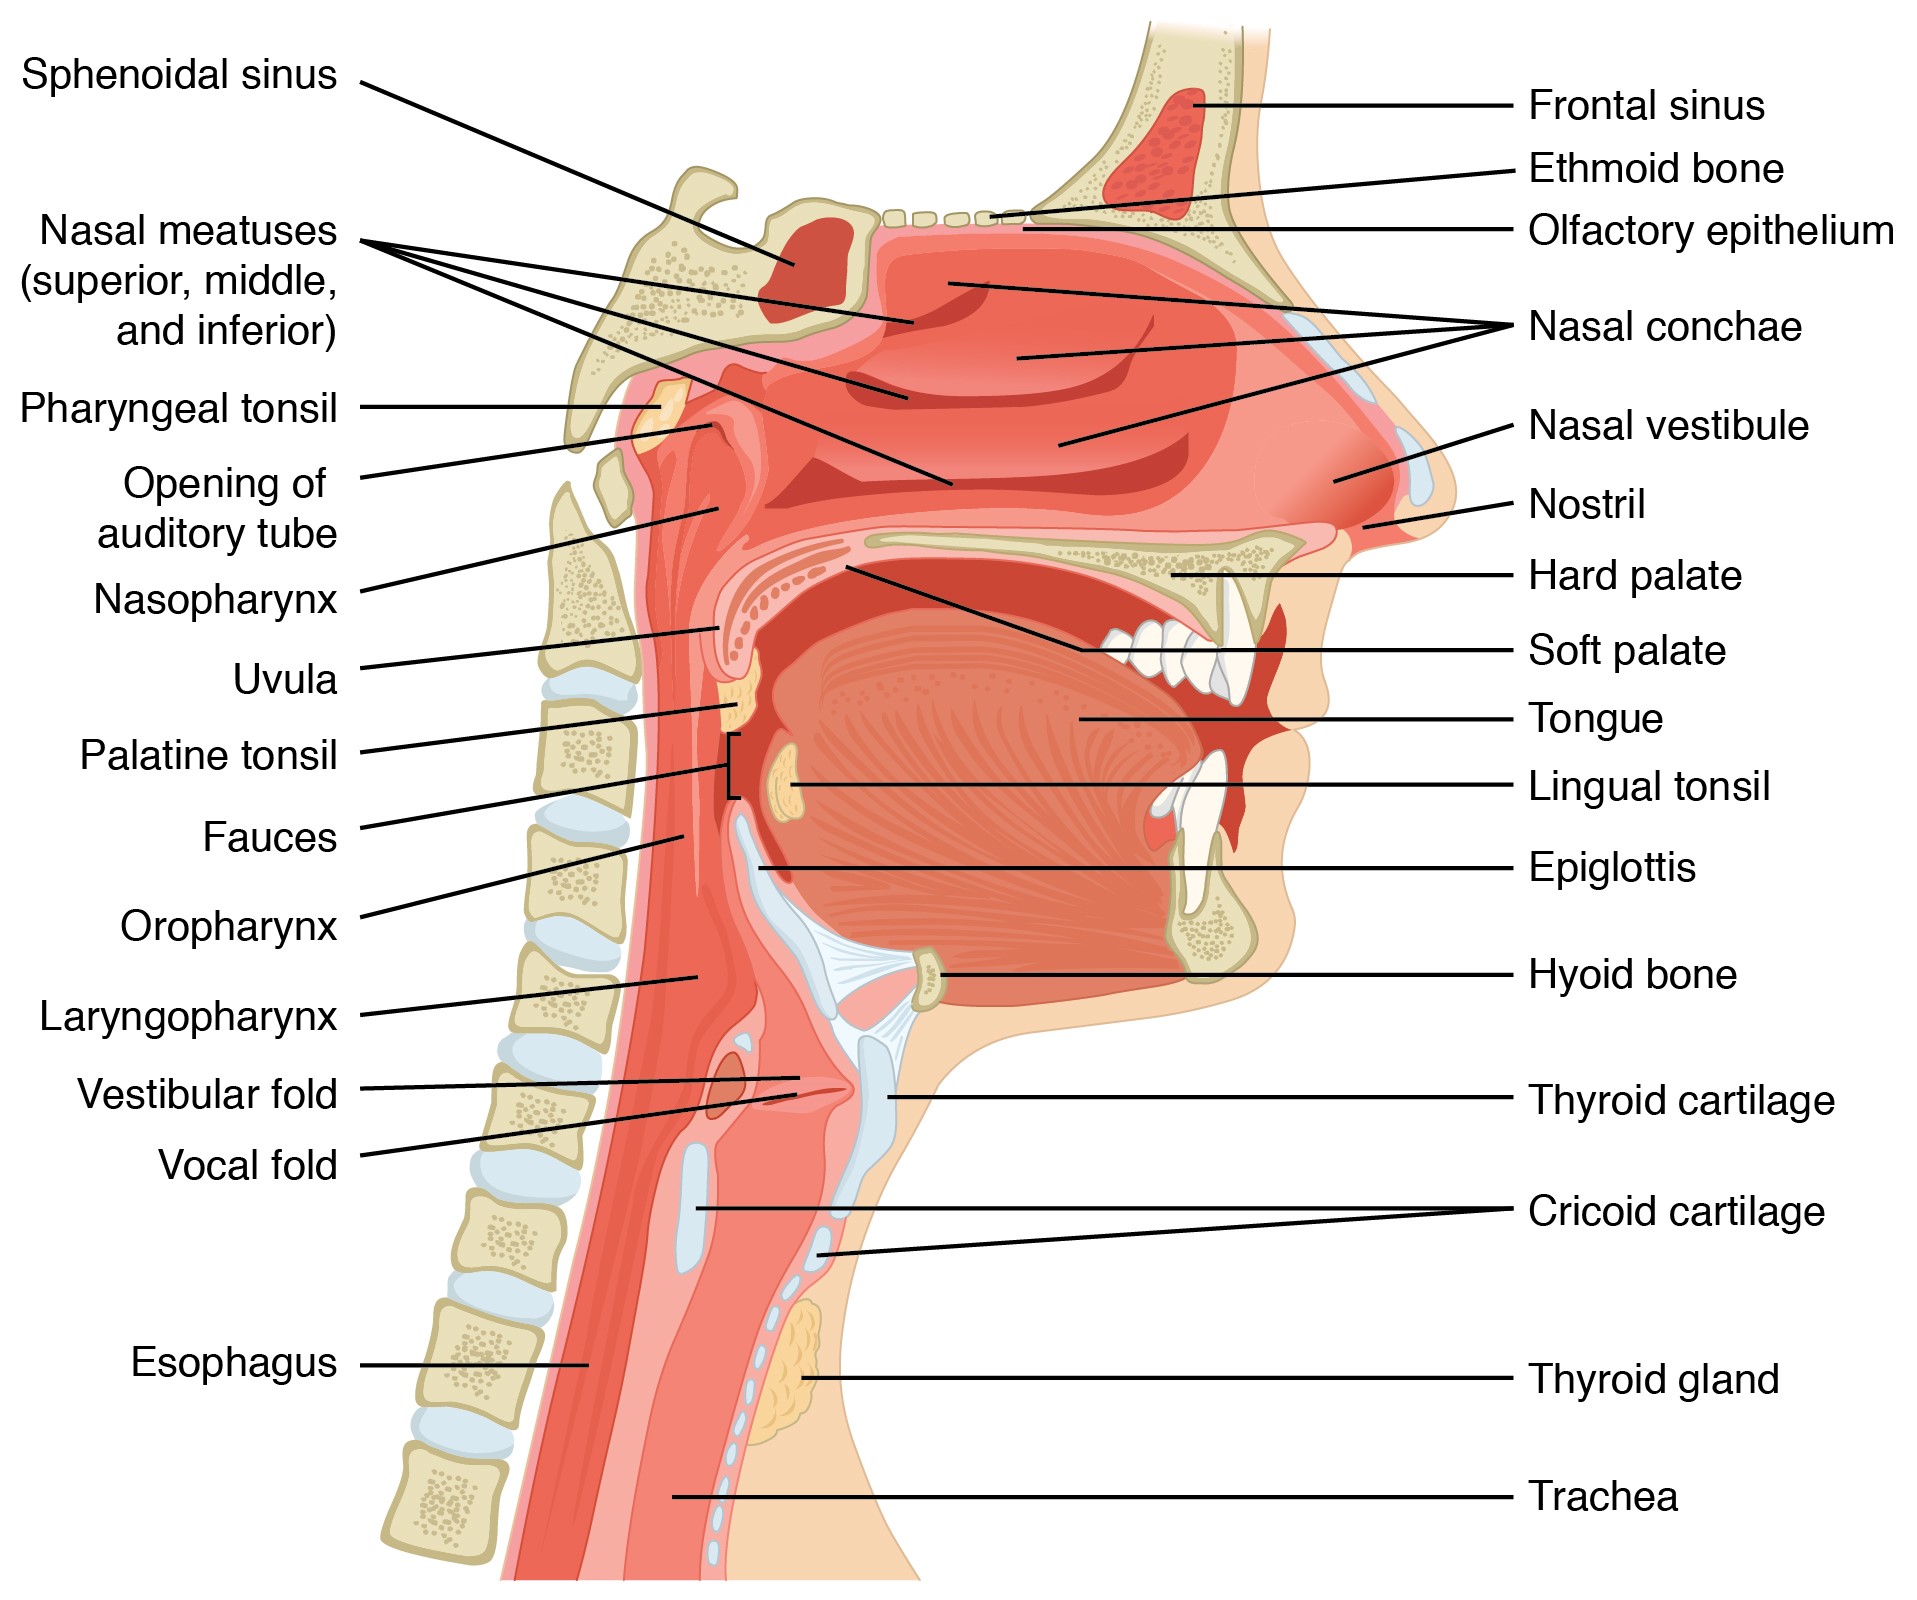 Sagittal view of the head and neck showing the location of the pharynx and its anatomical landmarks